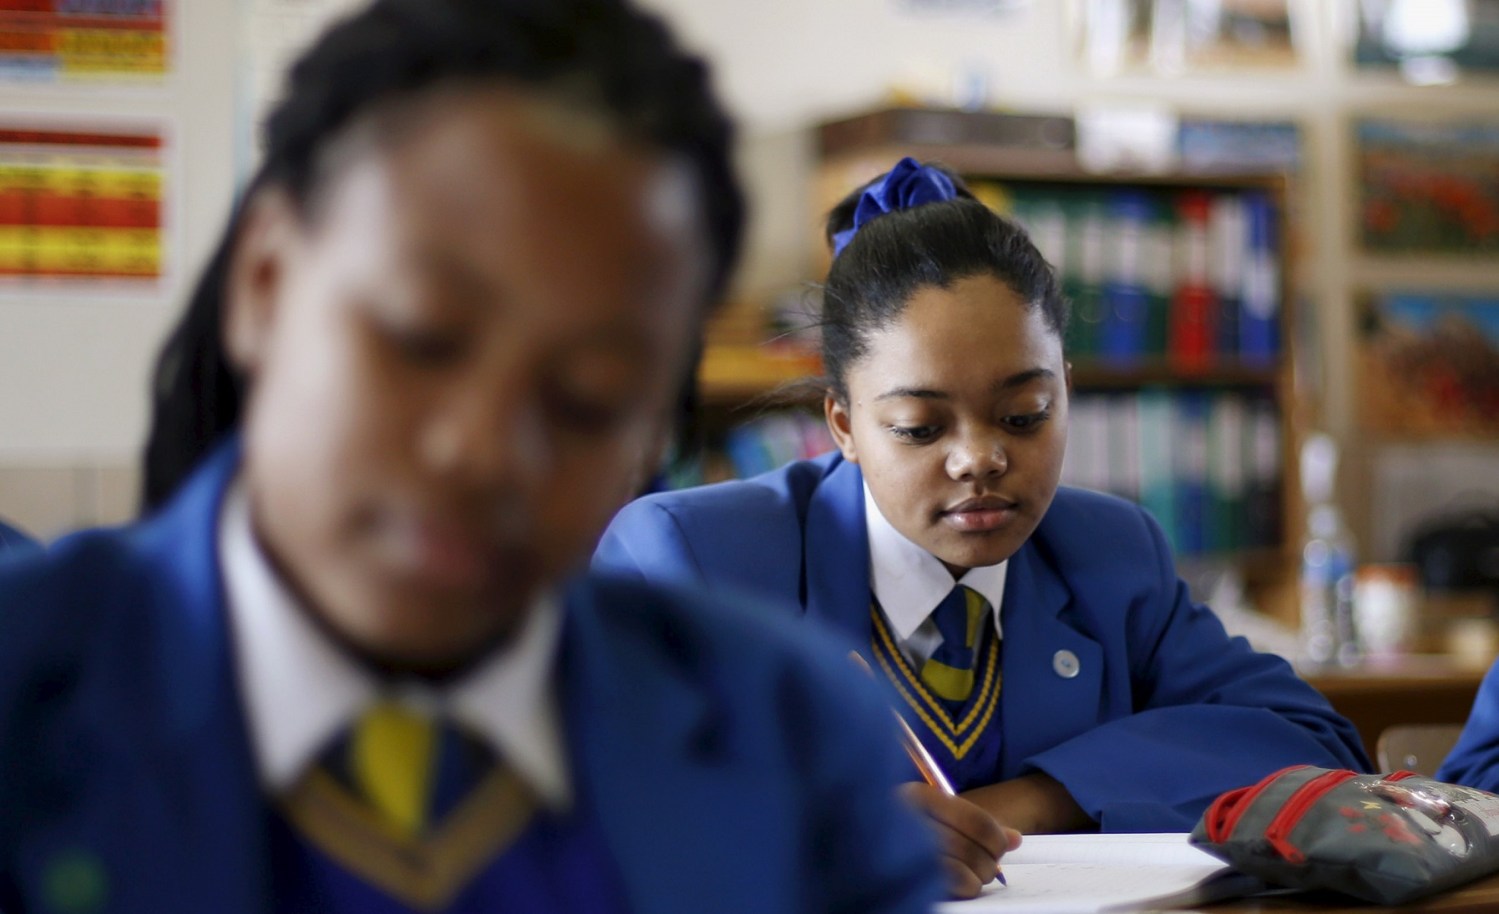 School children attend class at Waterstone College, a private school managed by Curro in the south of Johannesburg July 22, 2015. South African private education group Advtech rejected a takeover offer from its bigger rival Curro Holdings, saying on Tuesday the proposal contained "unacceptable pre-conditions". Advtech's shares fell more than 7 percent shortly after the announcement that it had rejected Curro's bid, but pared losses to close down 2.93 percent at 11.60 rand. The shares are up about 30 percent so far this year. Curro's stock shed 0.83 percent to close on 11.70 rand. REUTERS/Siphiwe Sibeko  - GF10000166735